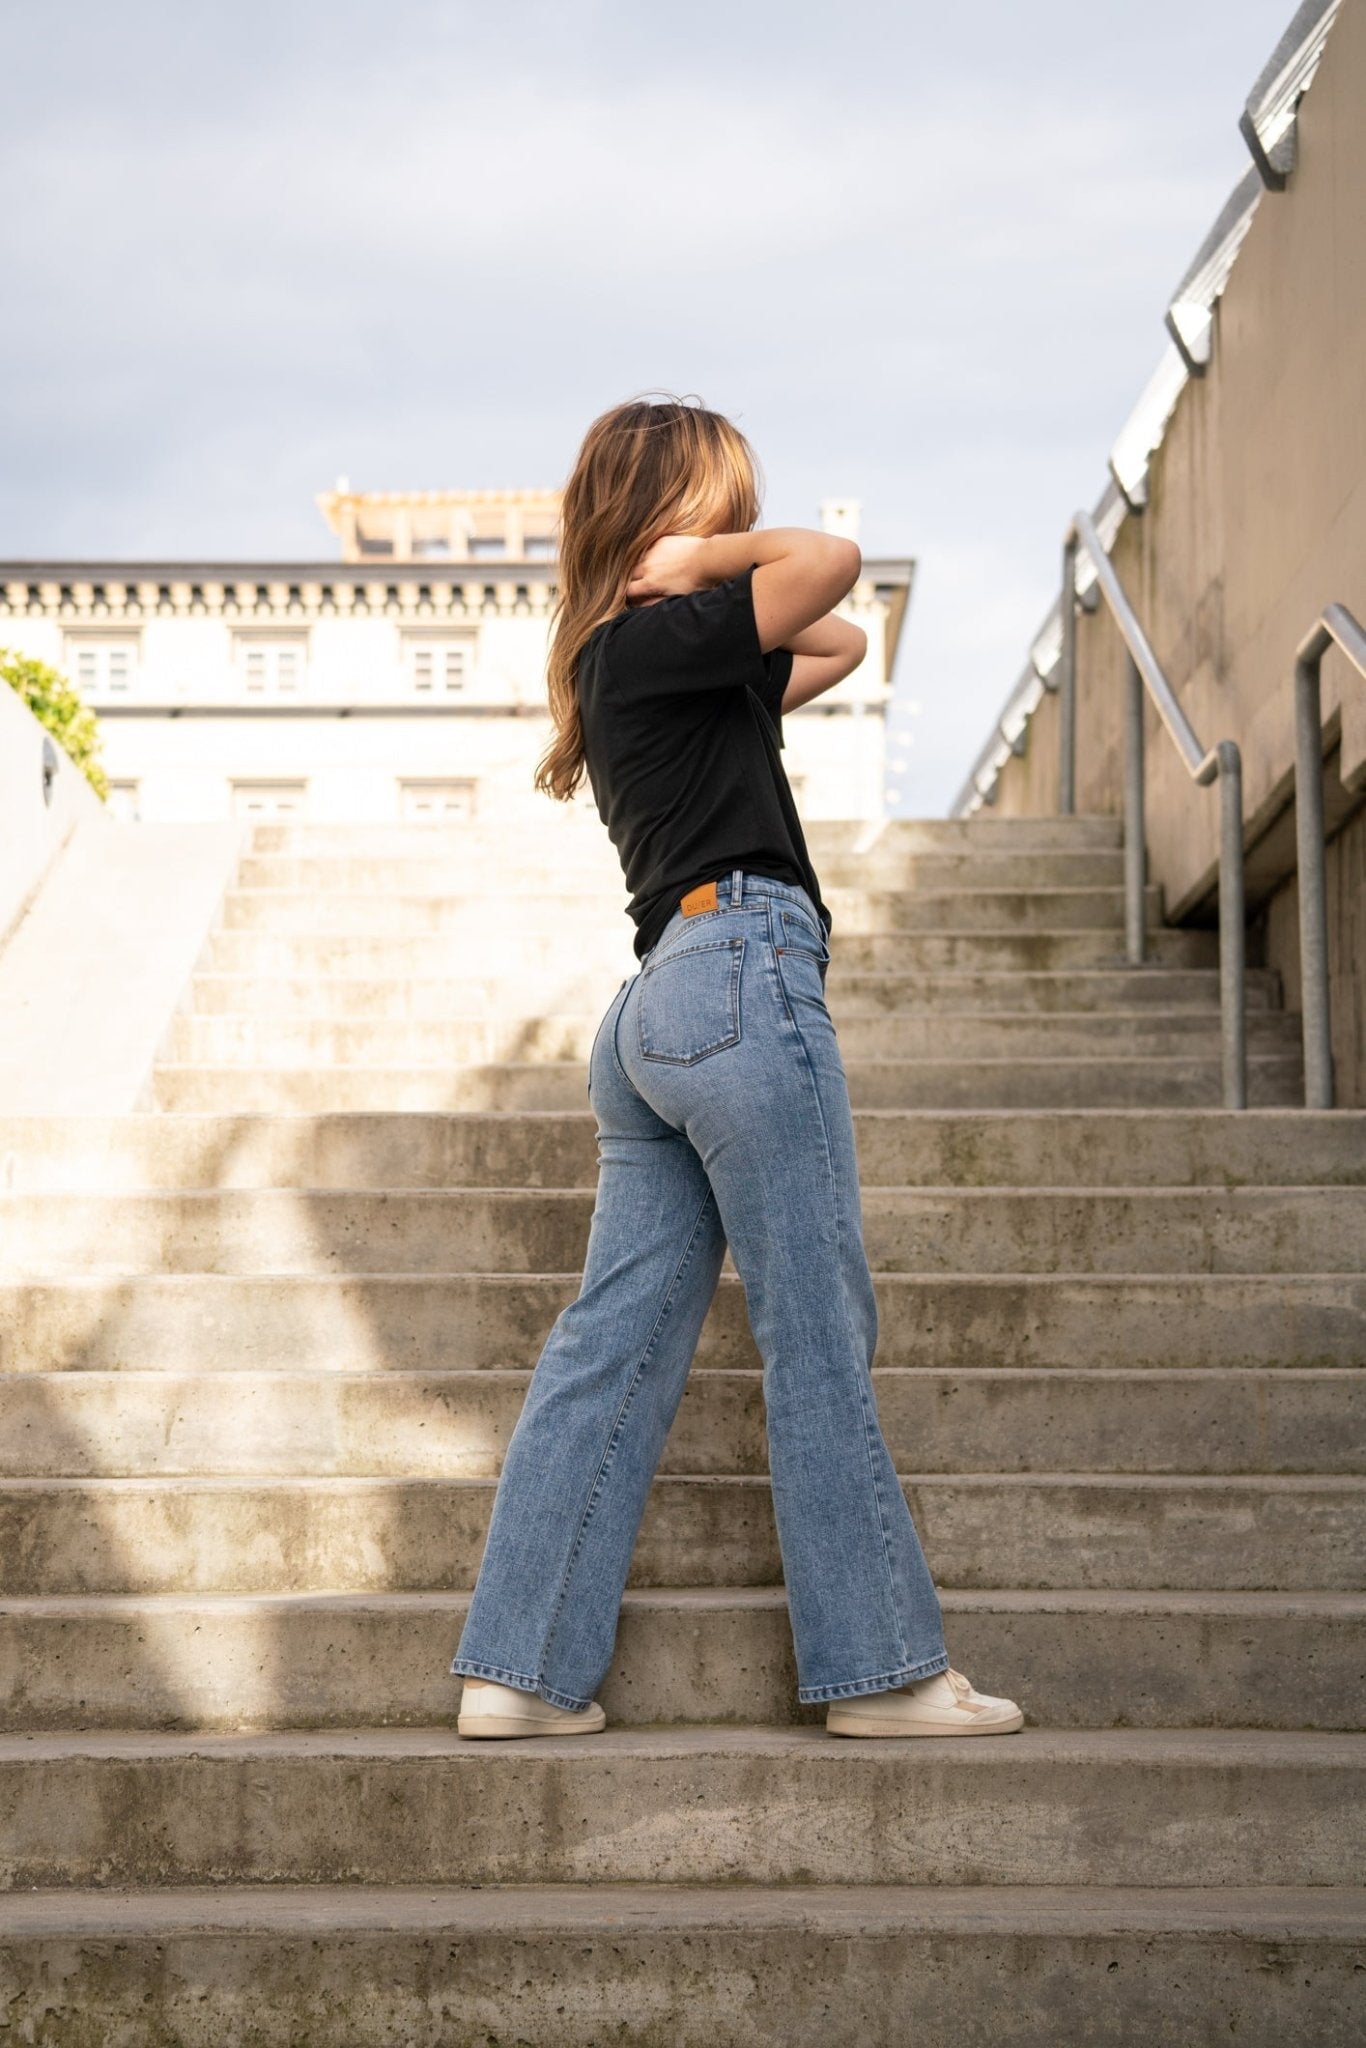 Z1975 HIGH-RISE JEANS WITH FRONT SEAM DETAIL - Blue